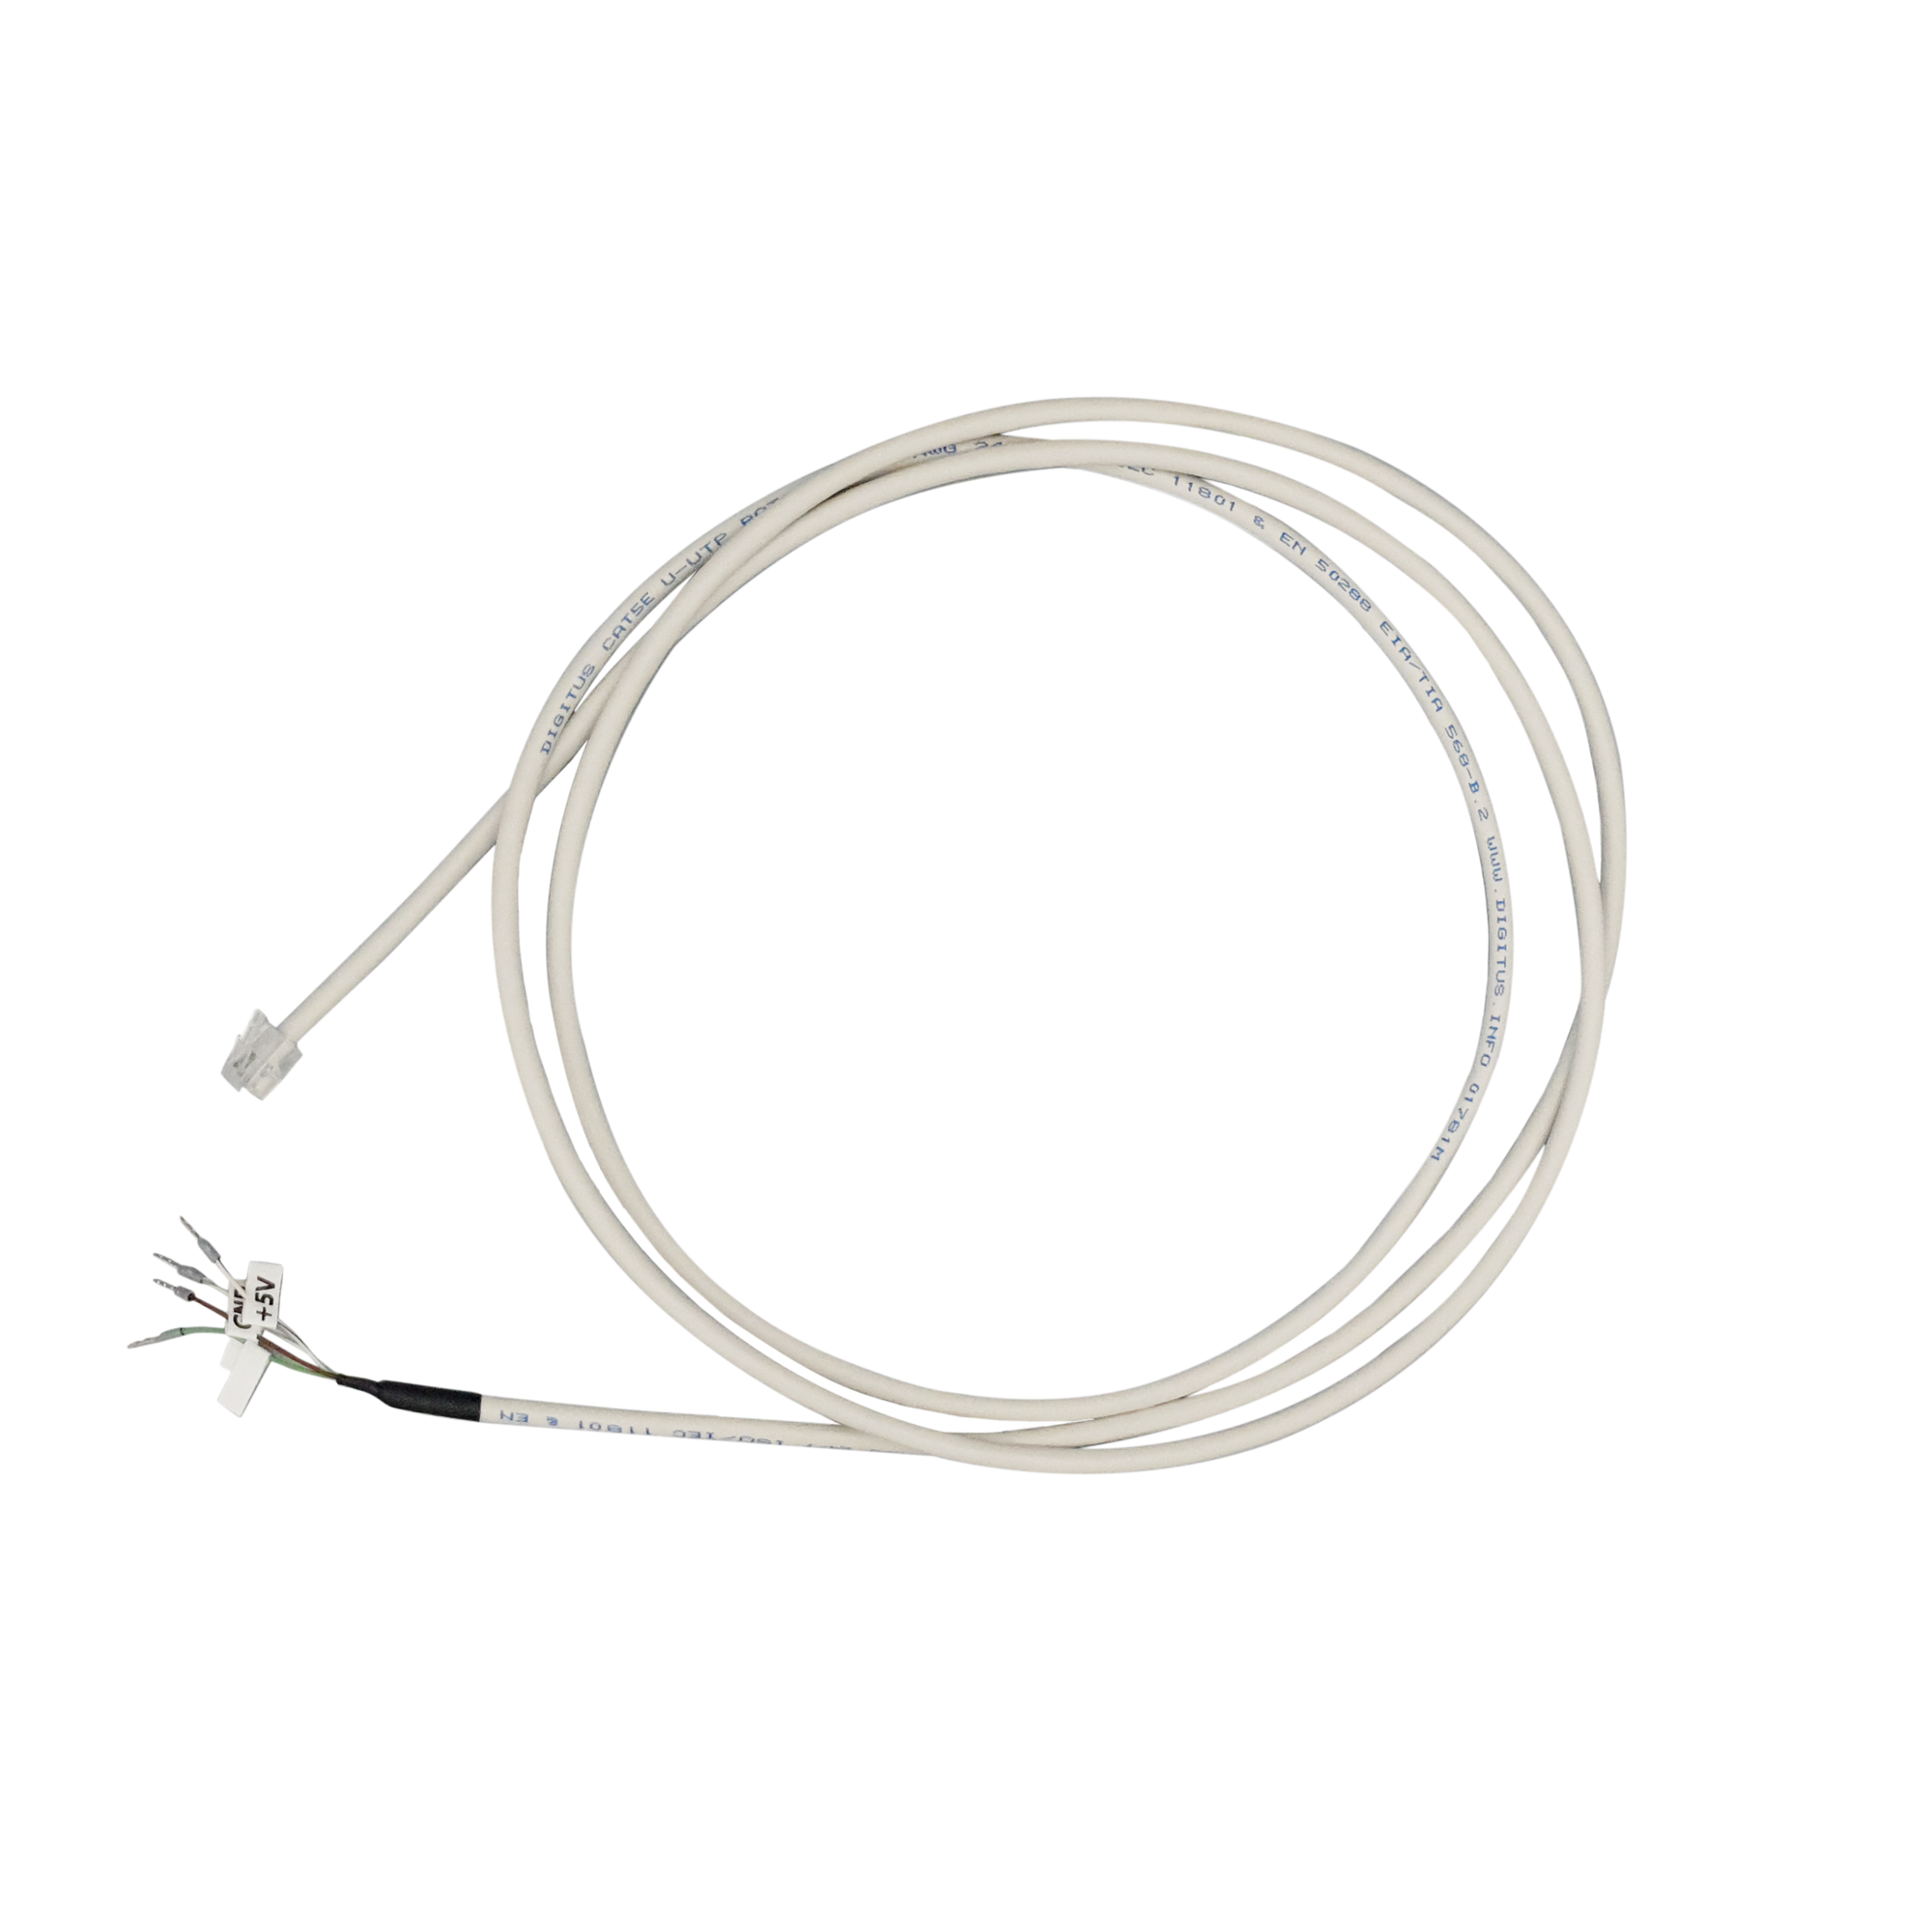 Serial connection cable (RS-485) for Kinco CV20 frequency converter - open ends